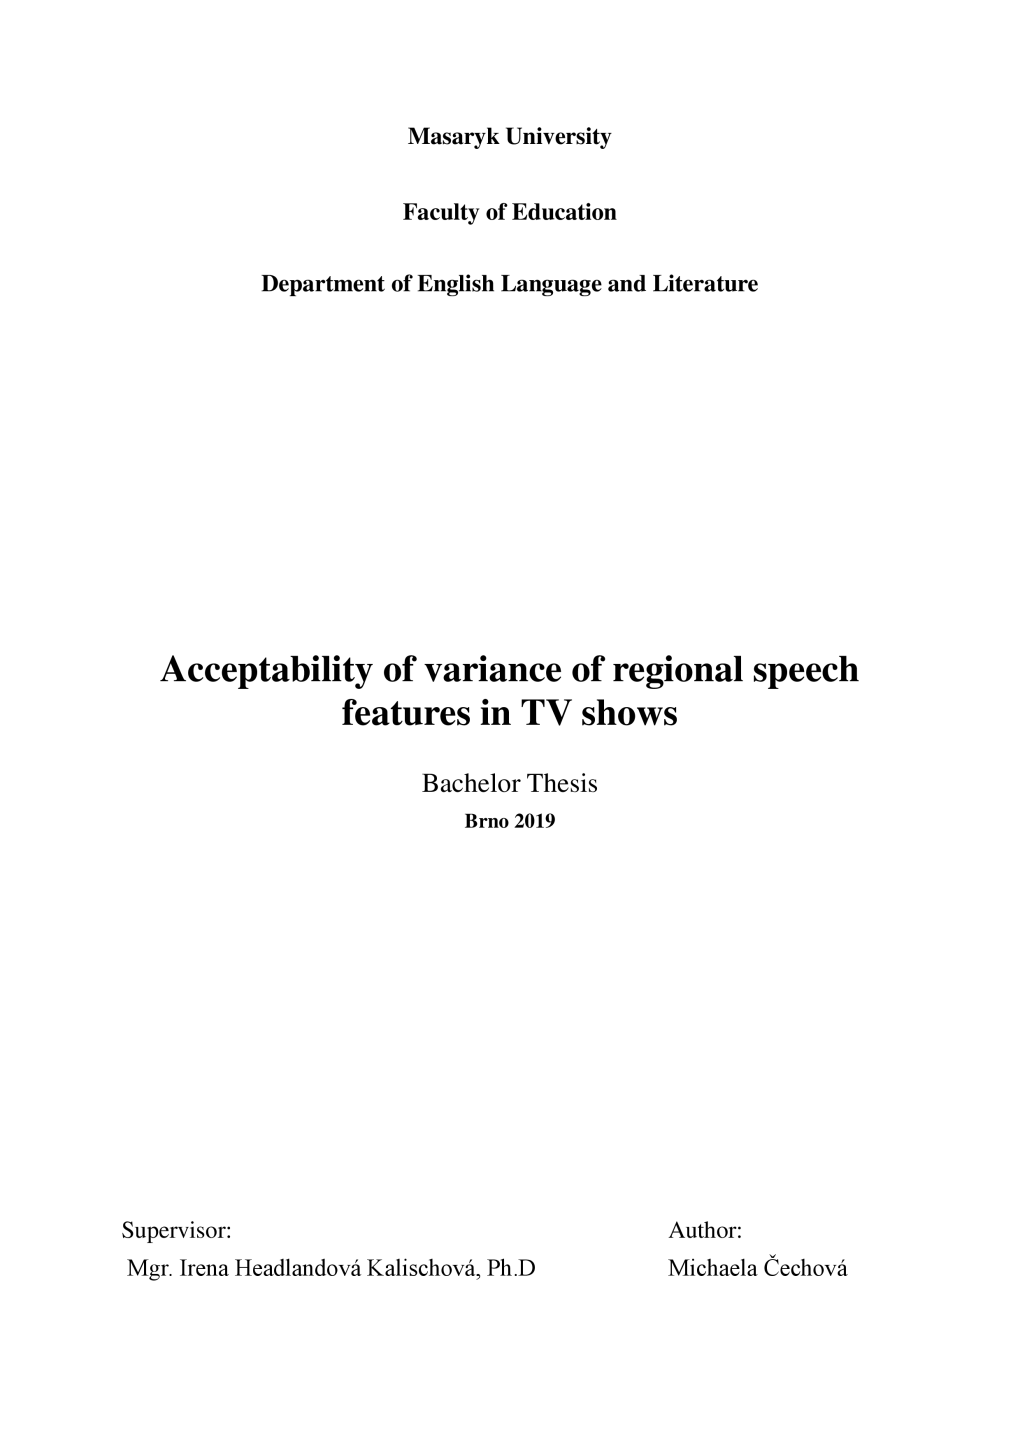 Acceptability of Variance of Regional Speech Features in TV Shows